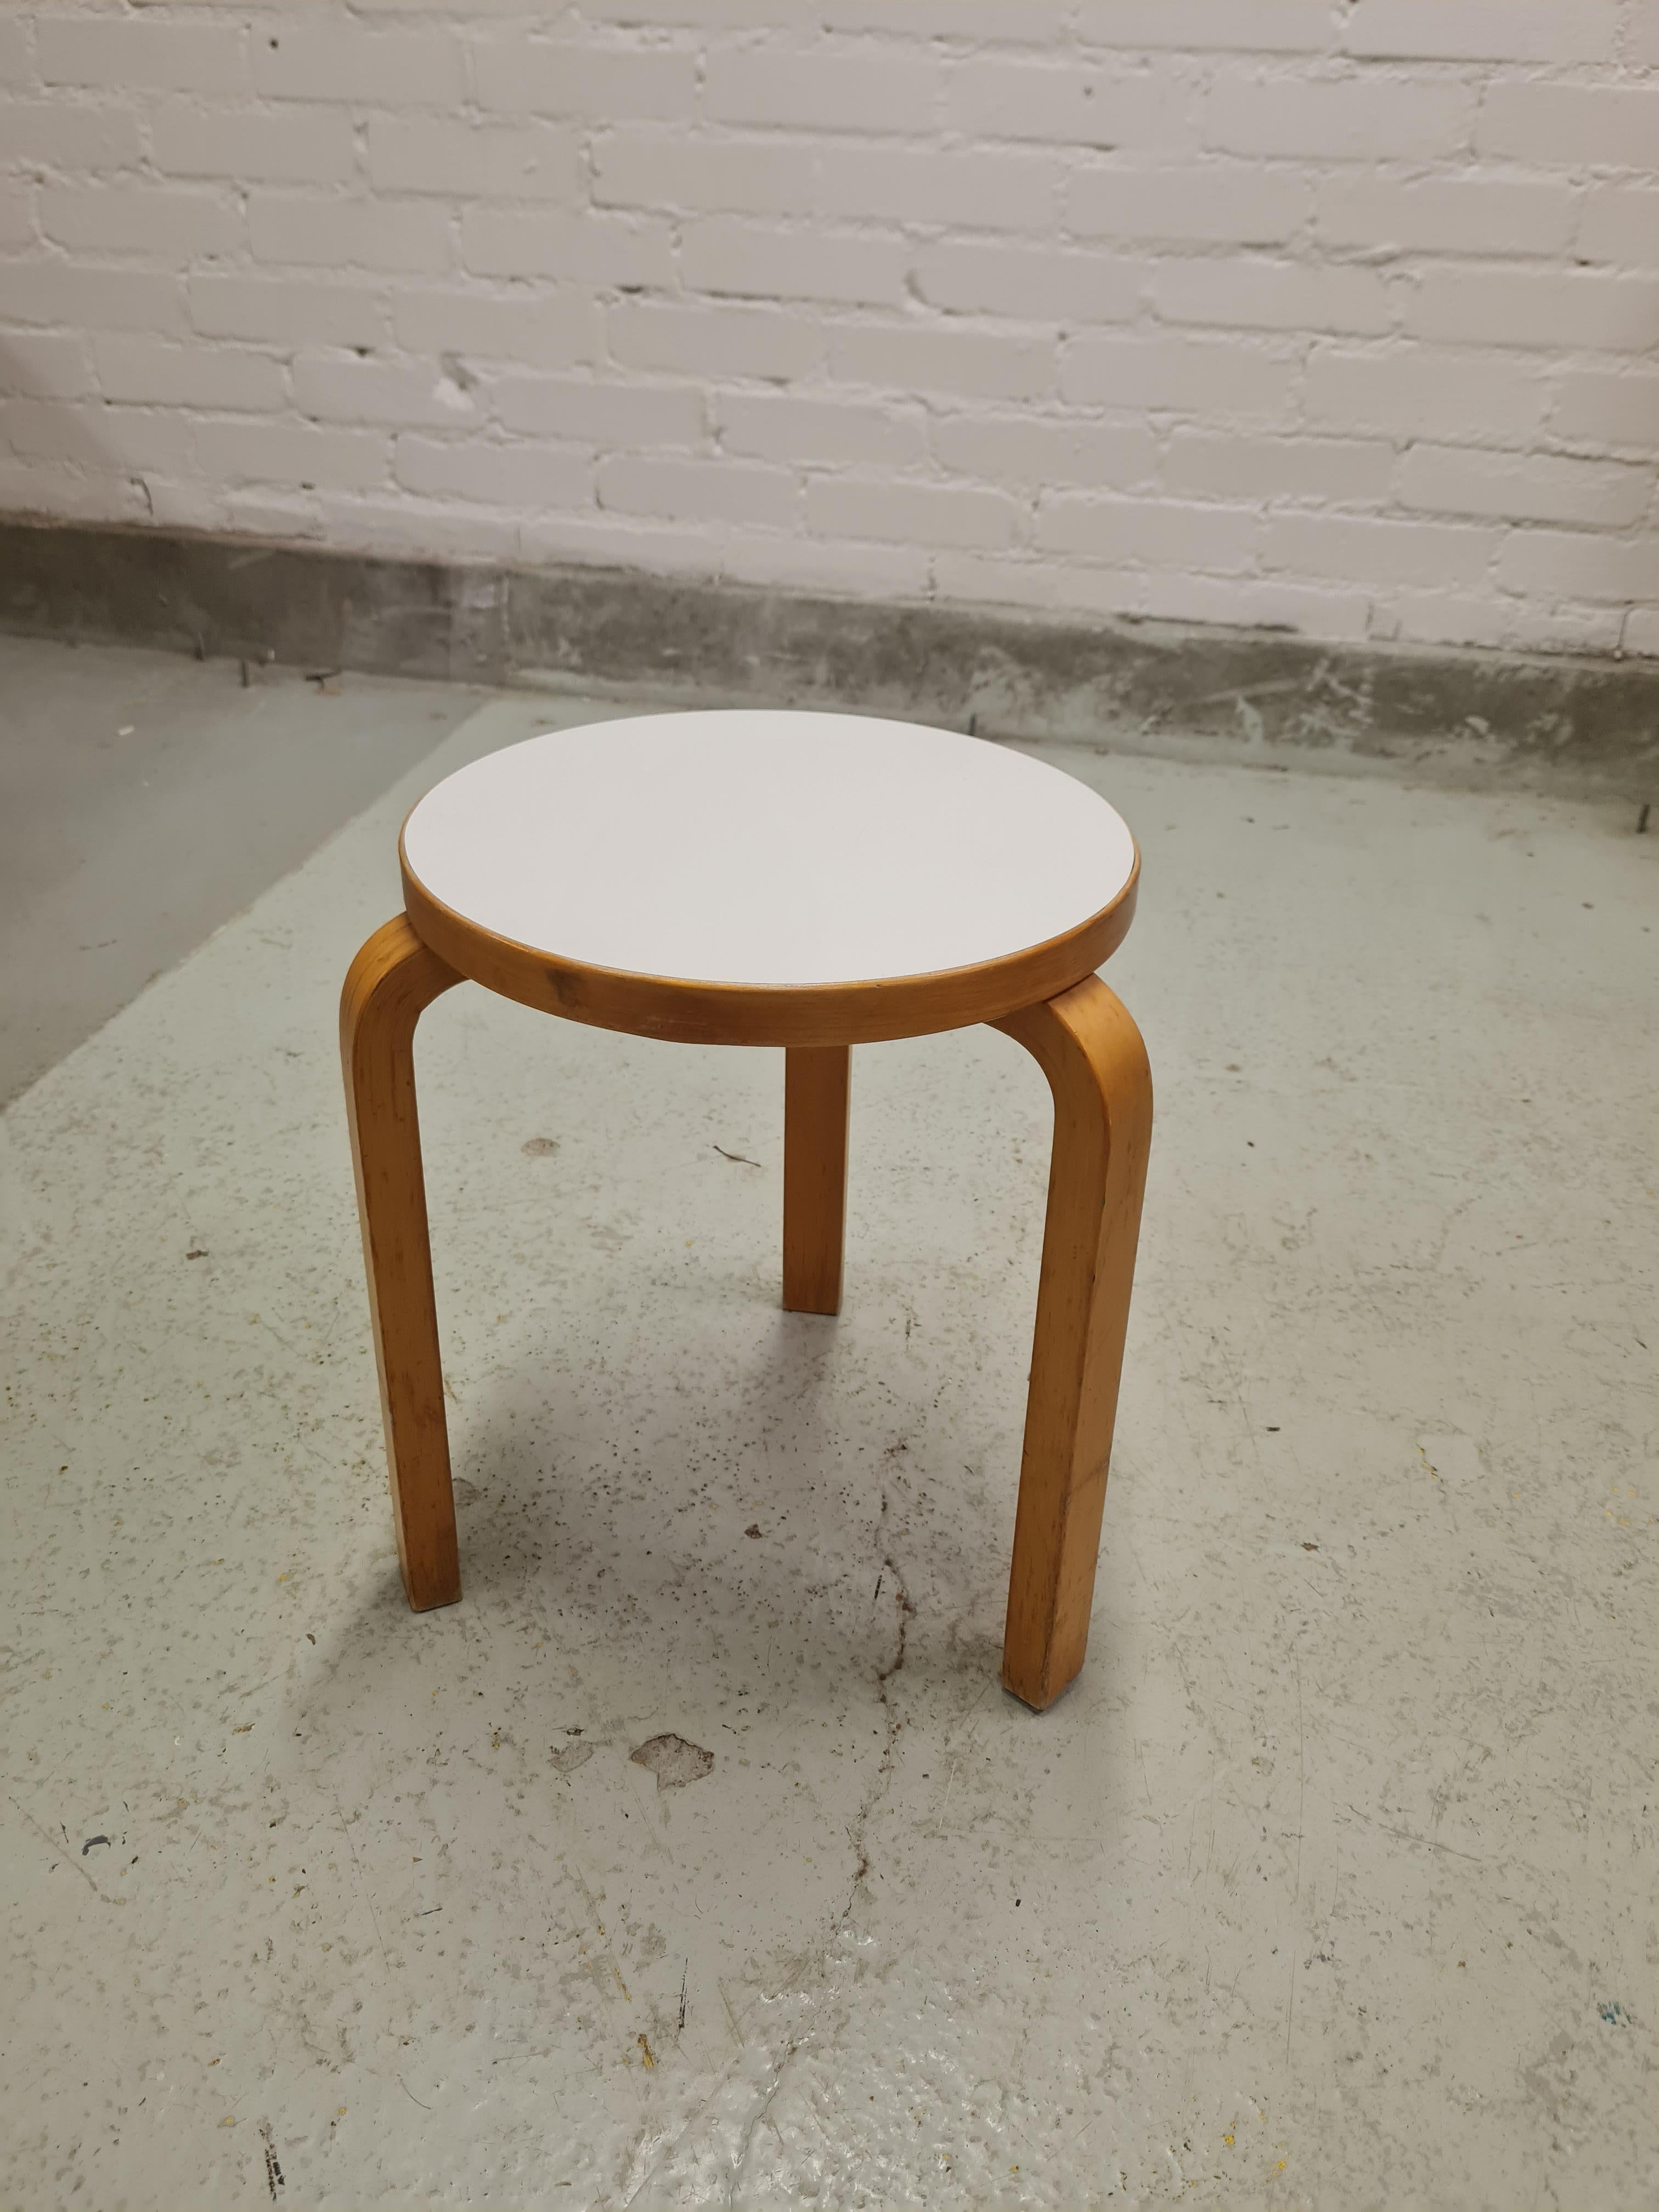 A beautiful and rarely seen example of the iconic Aalto stools with the original formica seating.
These 3 legged stools have long been our customers favorites, especially in rare colors and patina. 
This example in white fits these catagories.